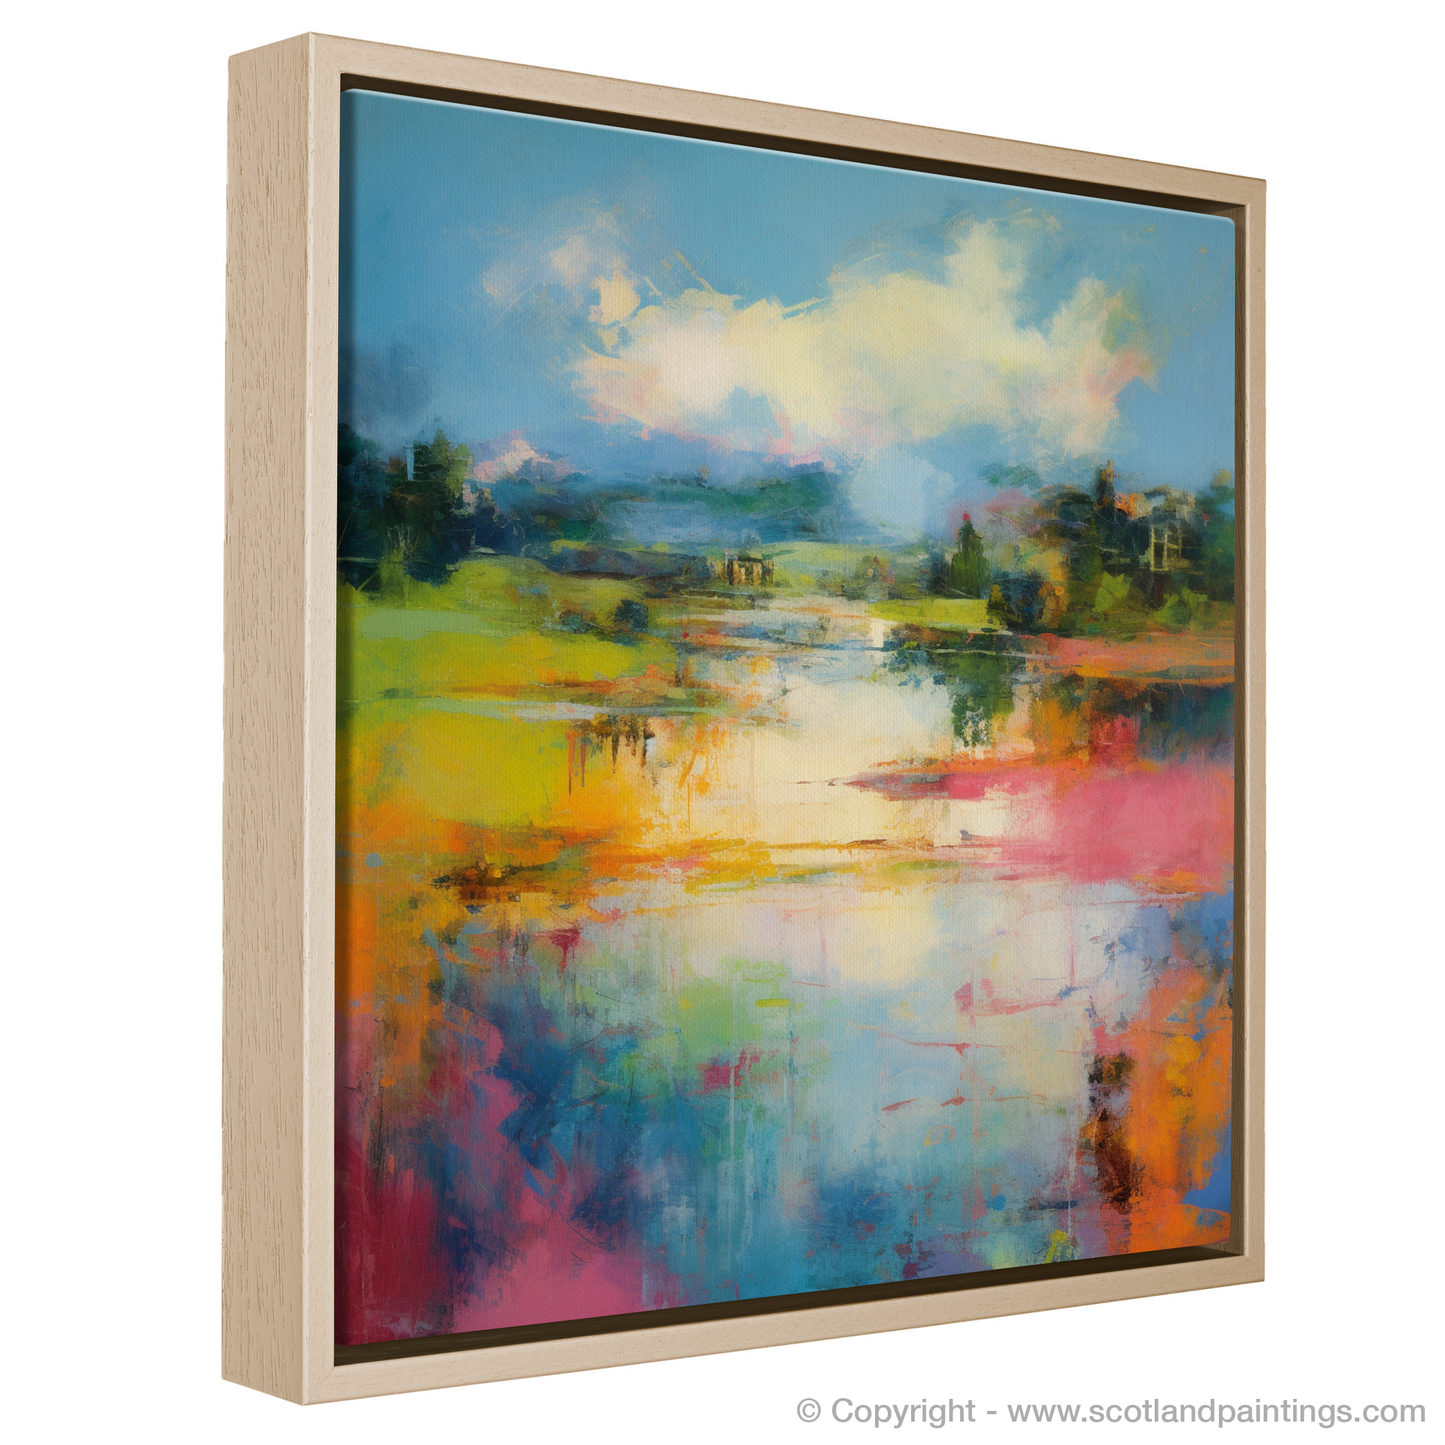 Painting and Art Print of River Ness, Inverness in summer entitled "Summer Serenade on River Ness".